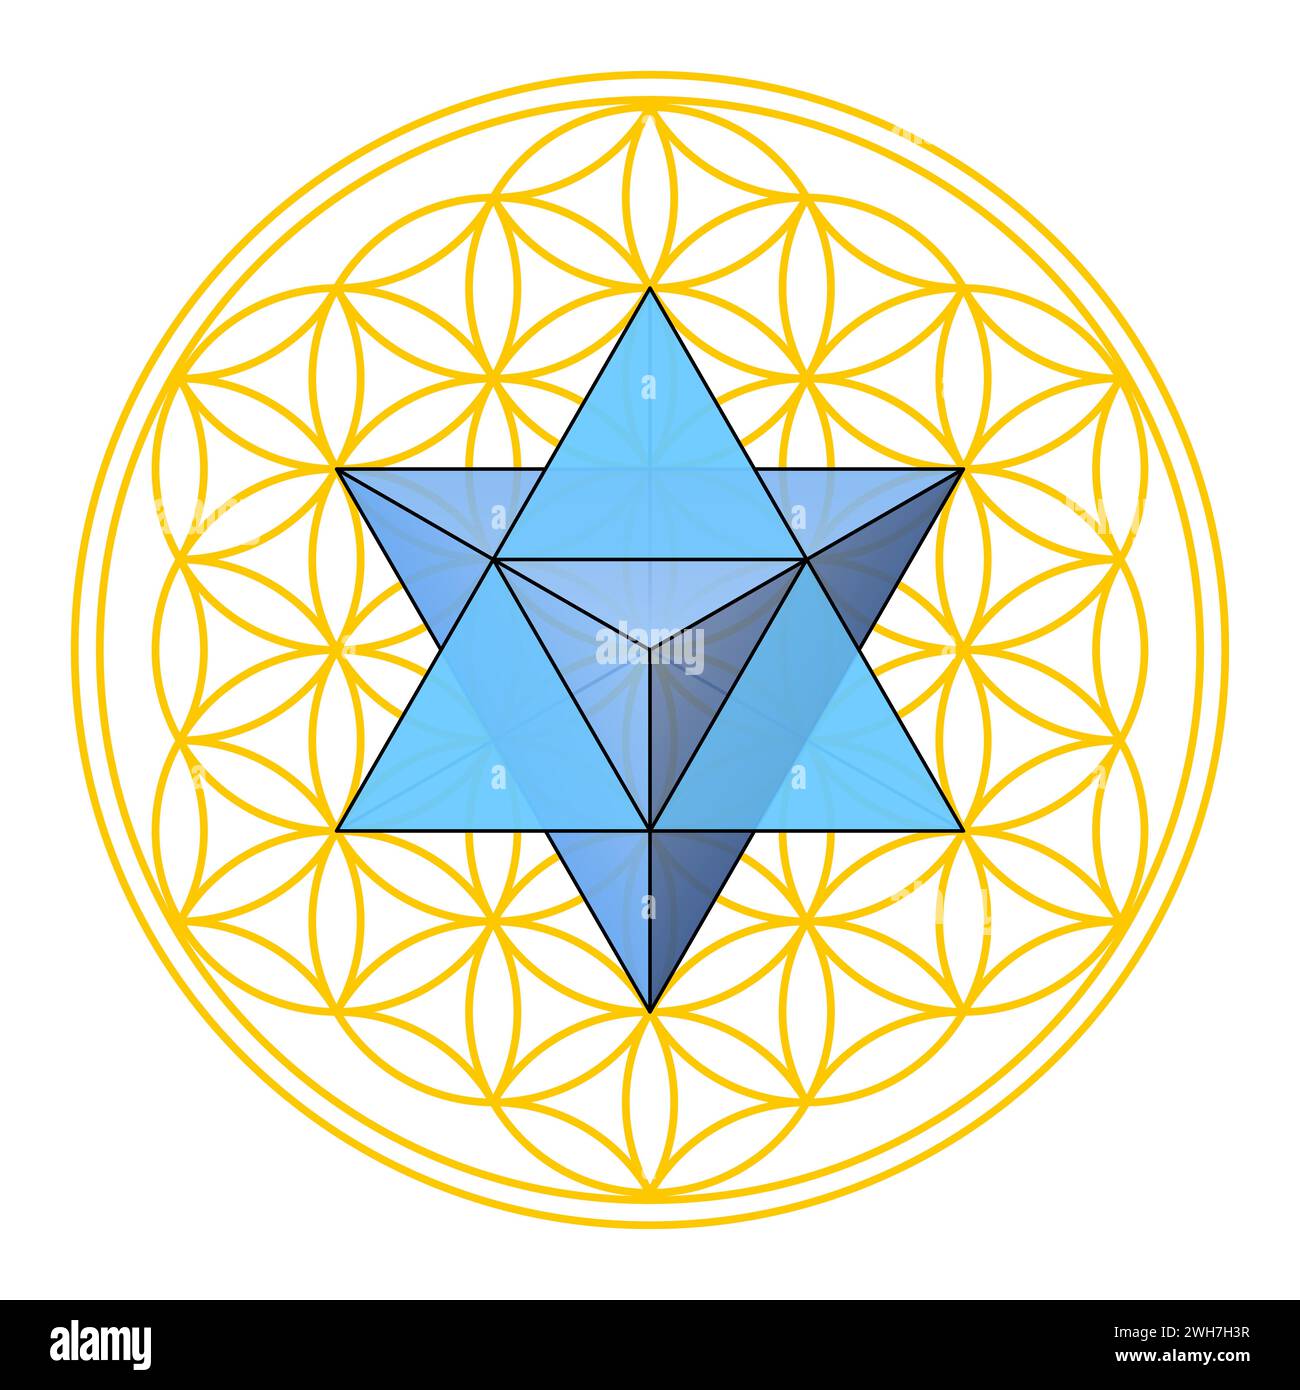 Flower of Life with Merkaba, Sacred Geometry. Star tetrahedron, a double tetrahedron, positioned in in the center of geometrical figure. Stock Photo